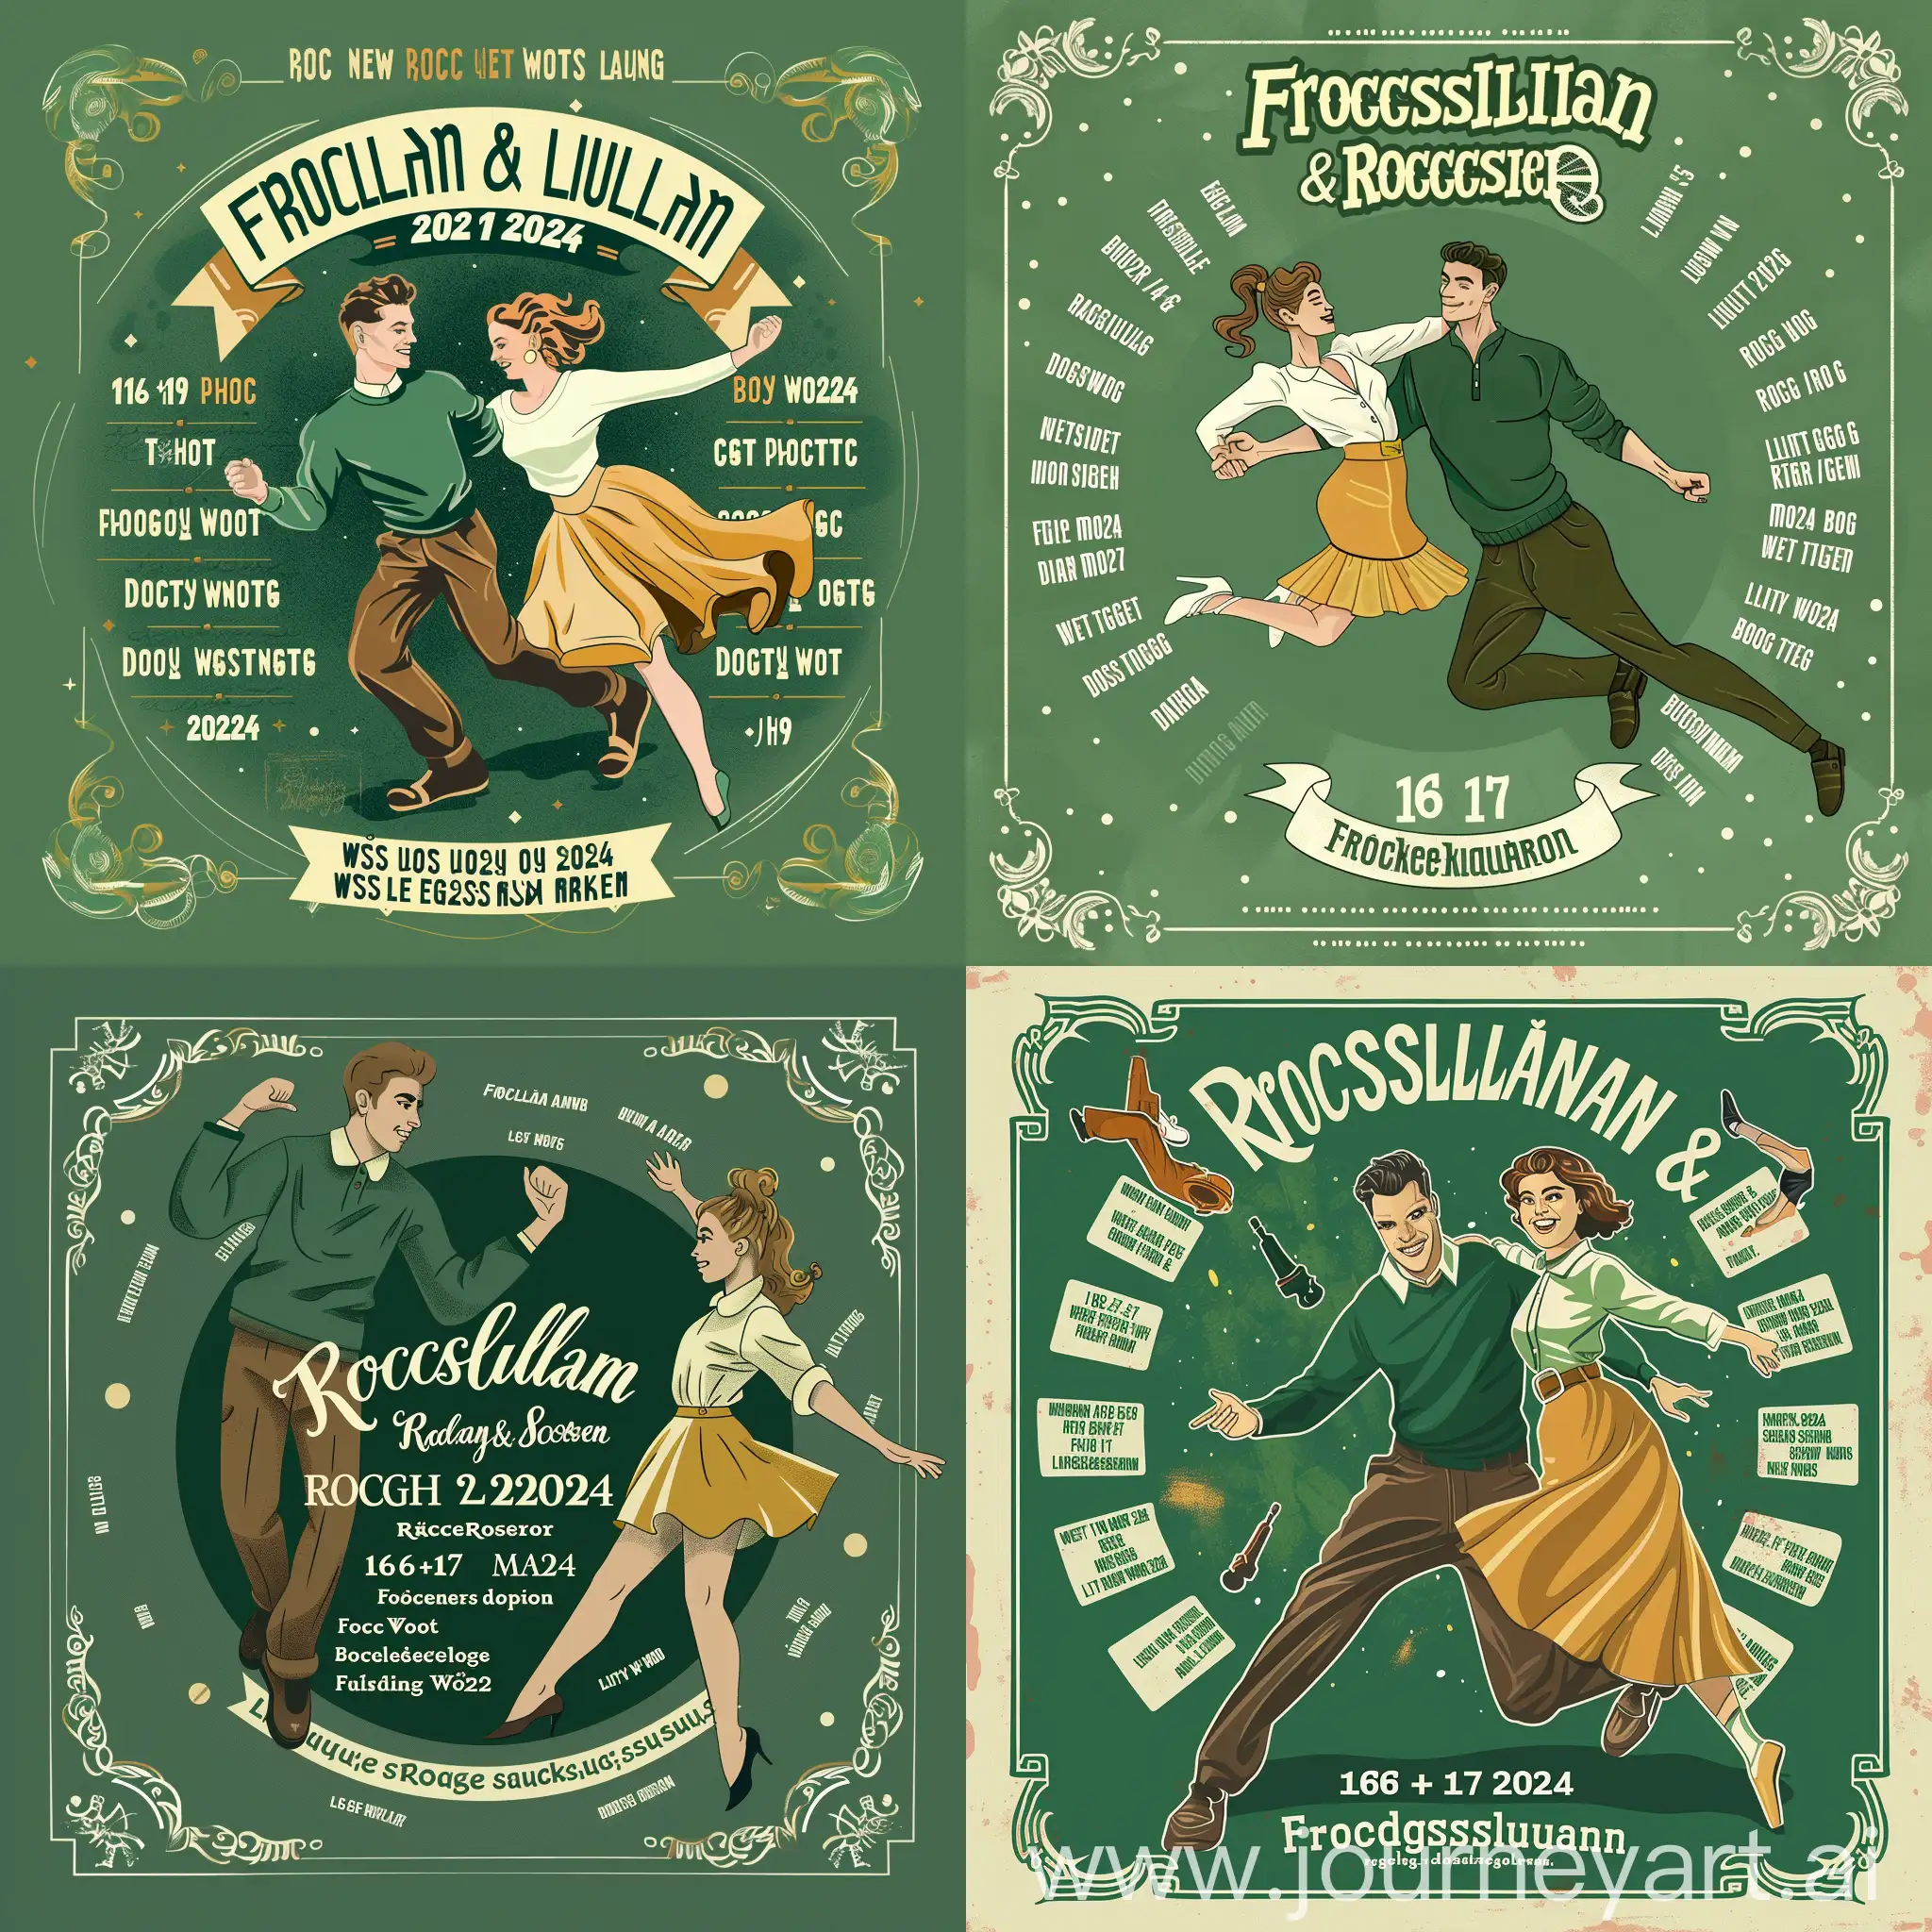 Create an illustration for a dance event poster with a vintage style and a green color scheme. At the center, include the updated event title 'Rockslulan & Rockslulesnurren' in a decorative, retro font similar to 1950s signage. Below it, place the new dates '16-17 MARS 2024' prominently. The event location, 'Fröding Arena', should be included just below the title. Feature an energetic, stylized illustration of a dance couple - the man in a dark green sweater and brown trousers, the woman in a bright yellow skirt and a white blouse - captured in a dynamic dance pose suggestive of movement and joy. Surrounding the central elements, add text listing various dance styles: Bugg, Lindy Hop, Boogie Woogie, Rock n' Roll, and West Coast Swing, arranged in a circular fashion around the perimeter of the design. The artwork should evoke the feel of a classic dance competition poster with a contemporary twist for the 2024 event.